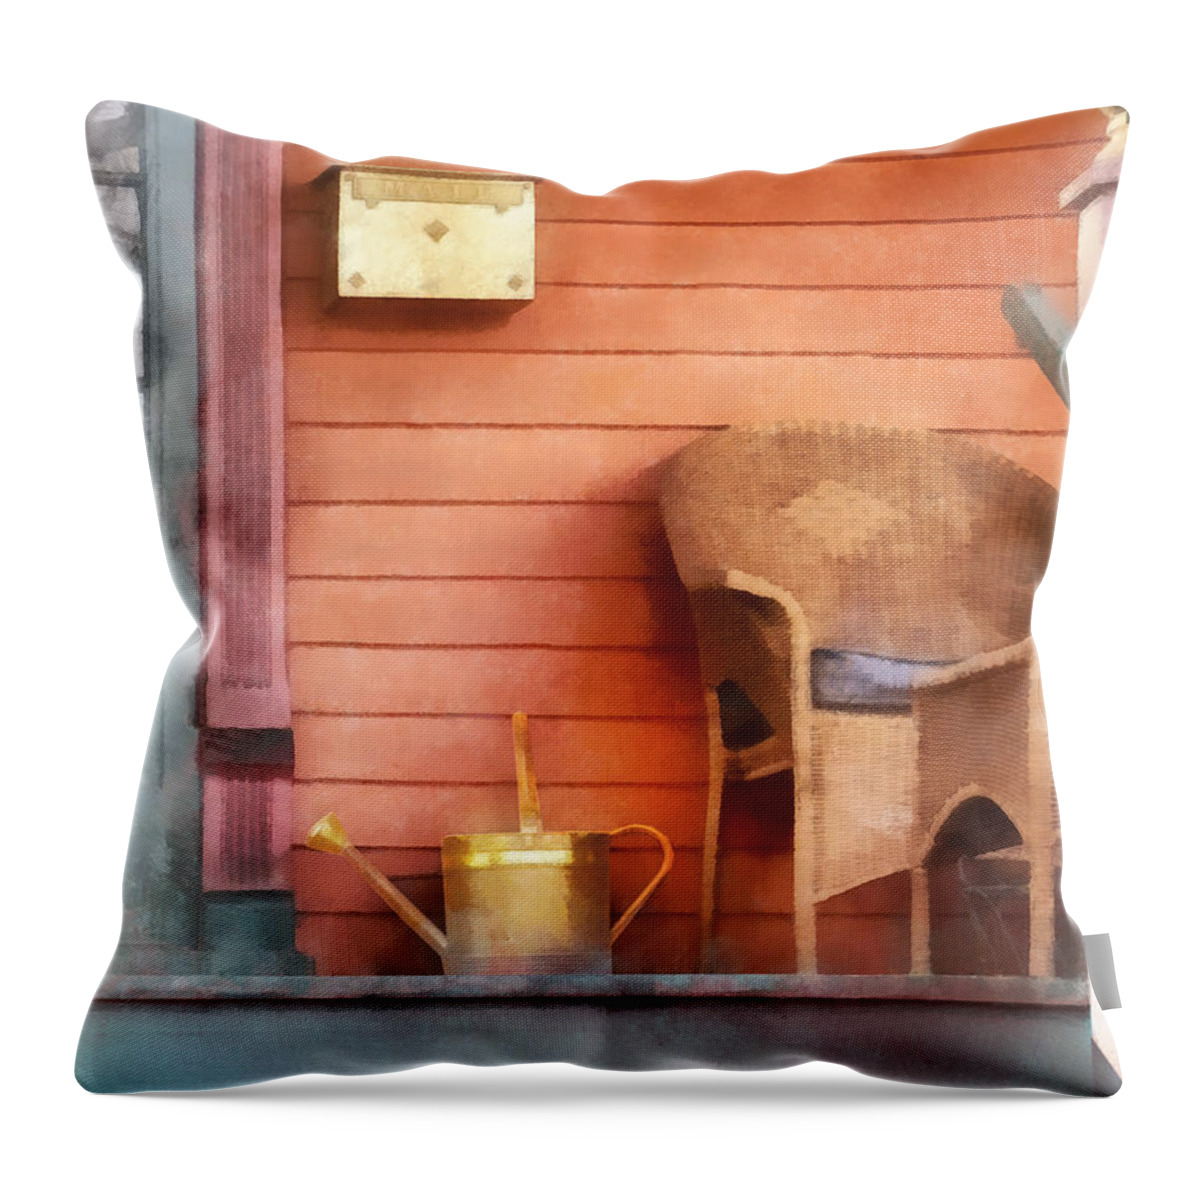 Watering Can Throw Pillow featuring the photograph Porch With Brass Watering Can by Susan Savad